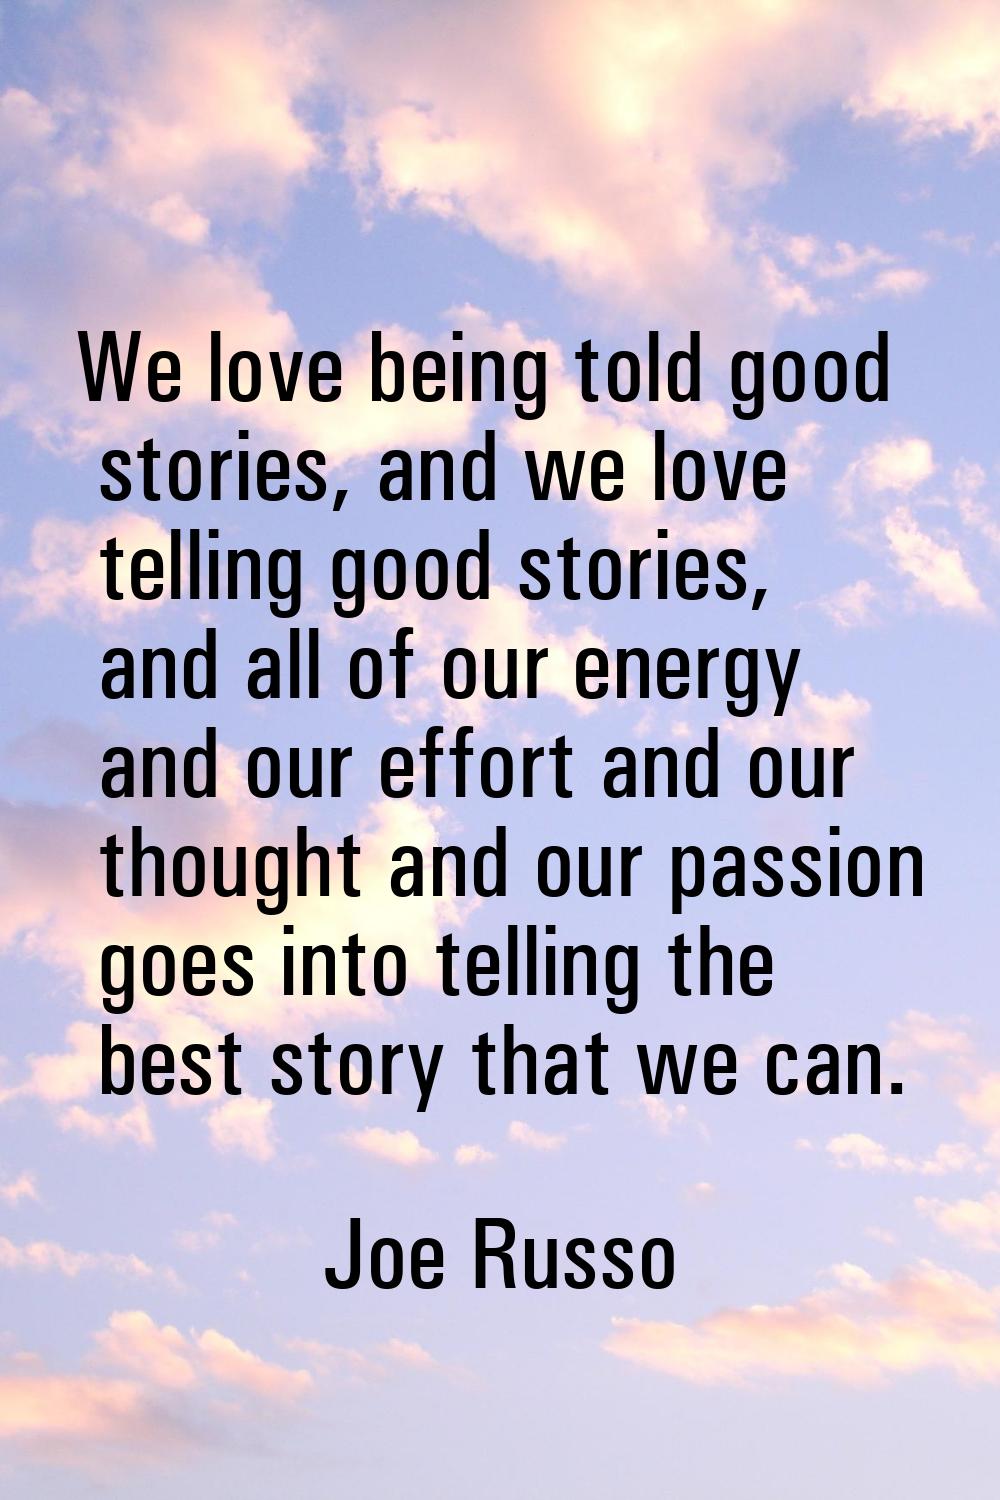 We love being told good stories, and we love telling good stories, and all of our energy and our ef